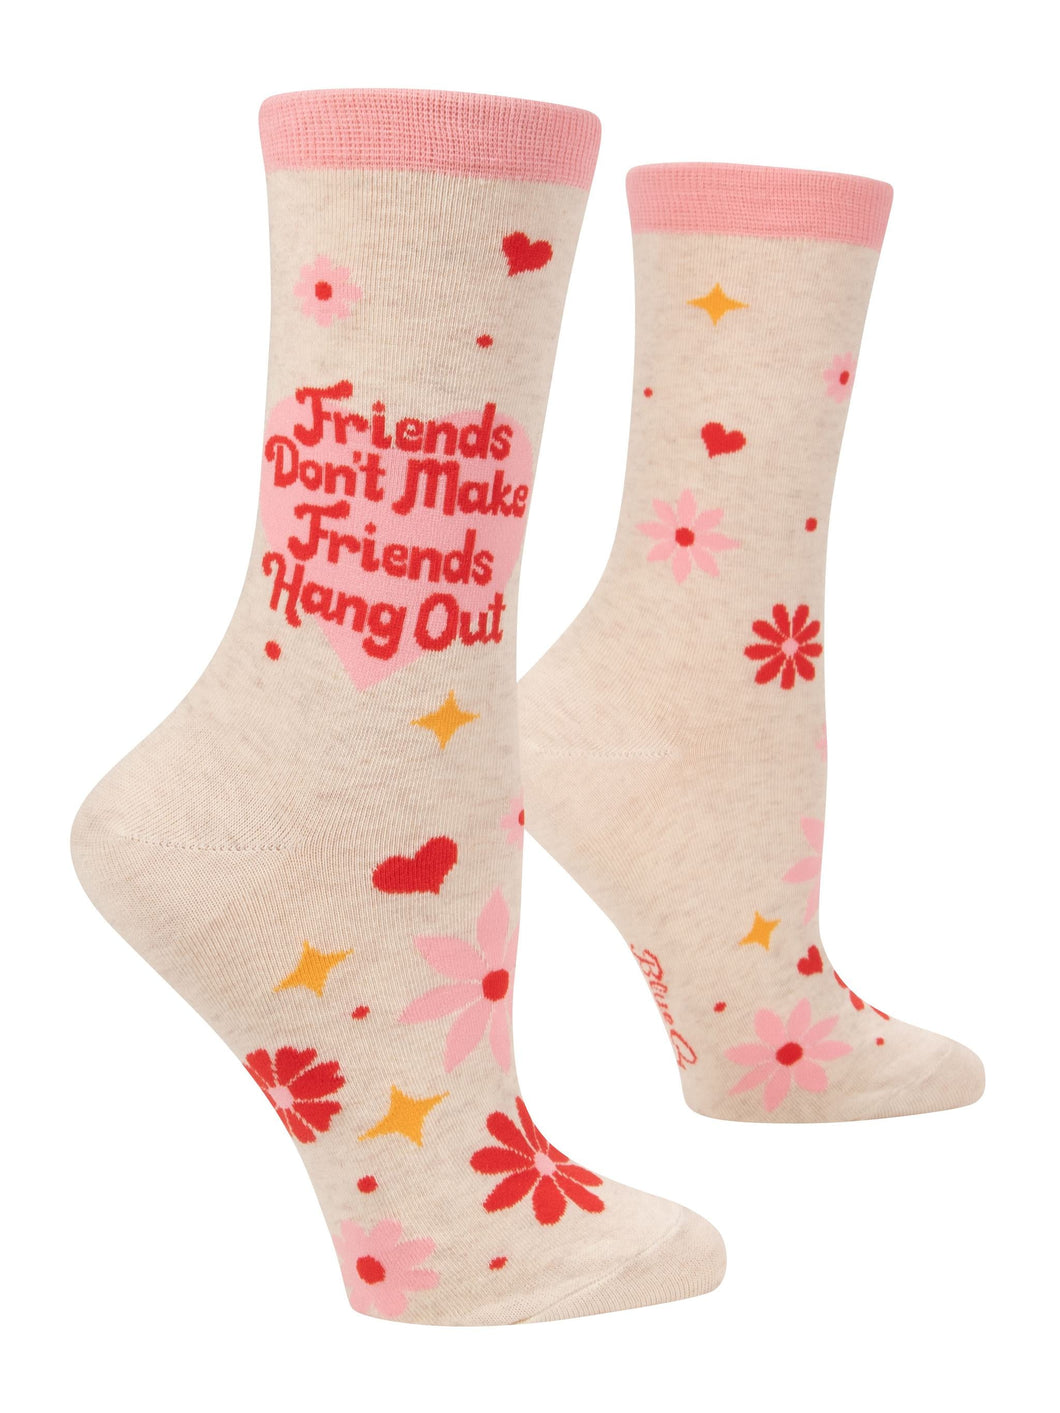 Friends Hang Out Crew Socks